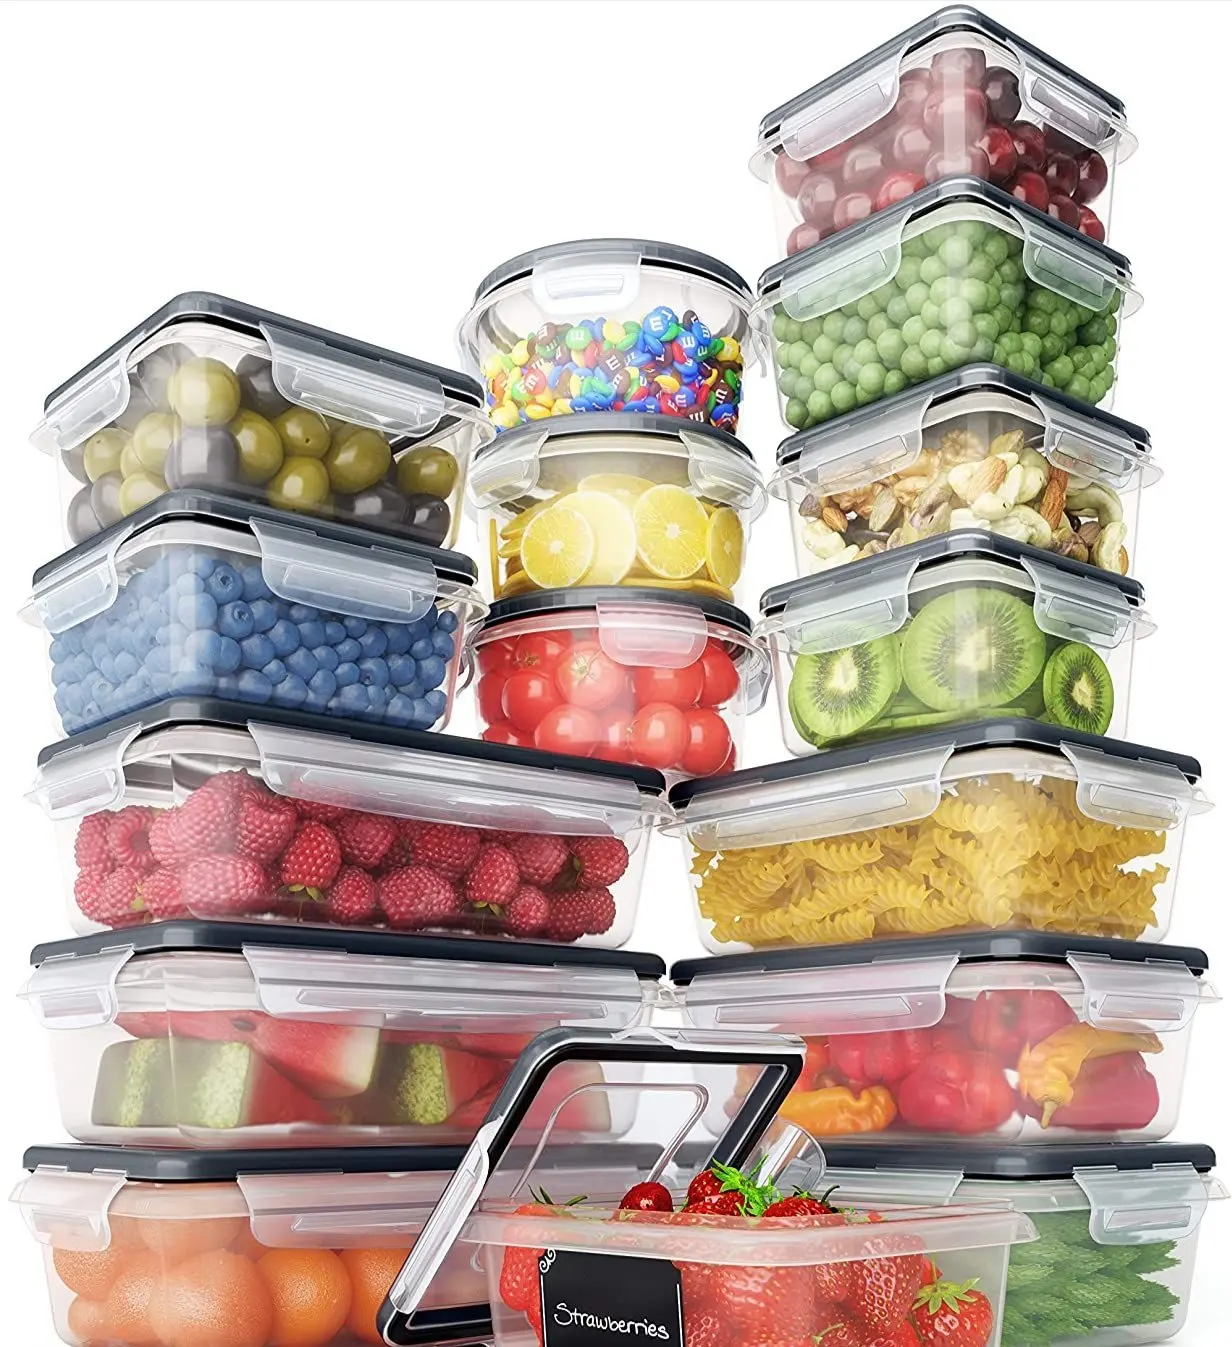 16 pc Set Kitchen Plastic Food Storage Container with Easy Snap Lids